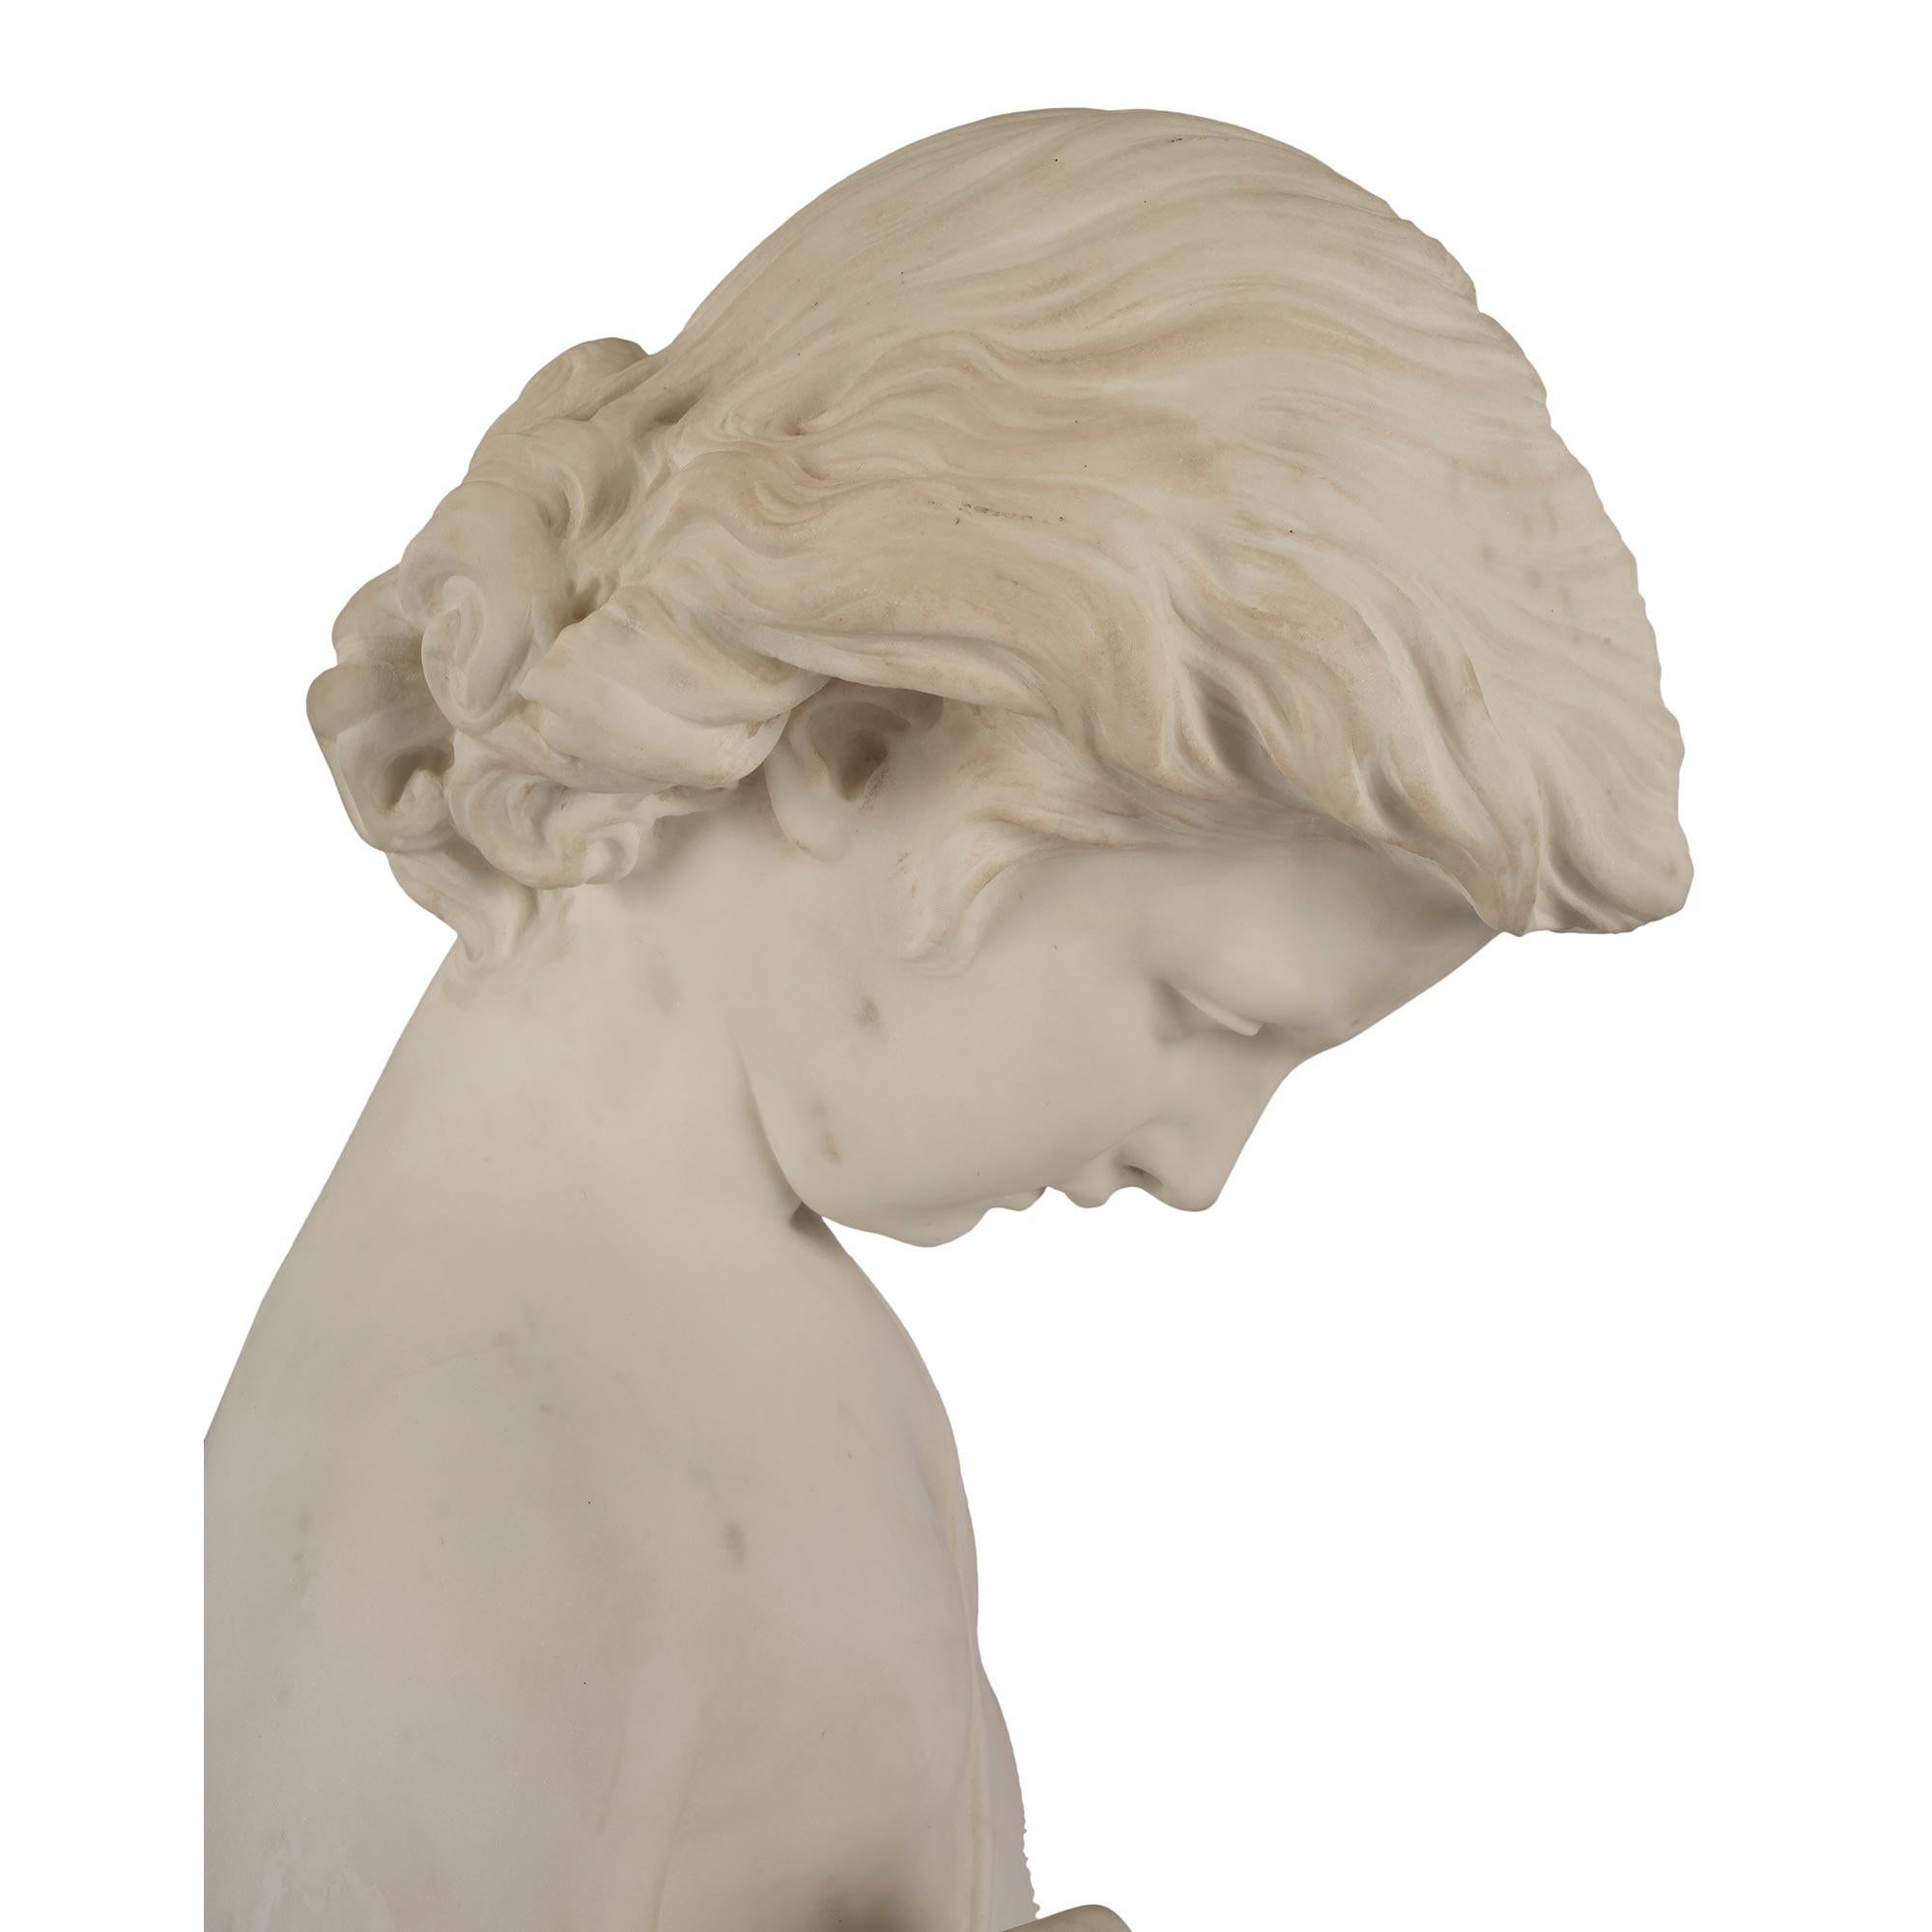 Italian 19th Century White Carrara Marble Statue of a Young Boy For Sale 5